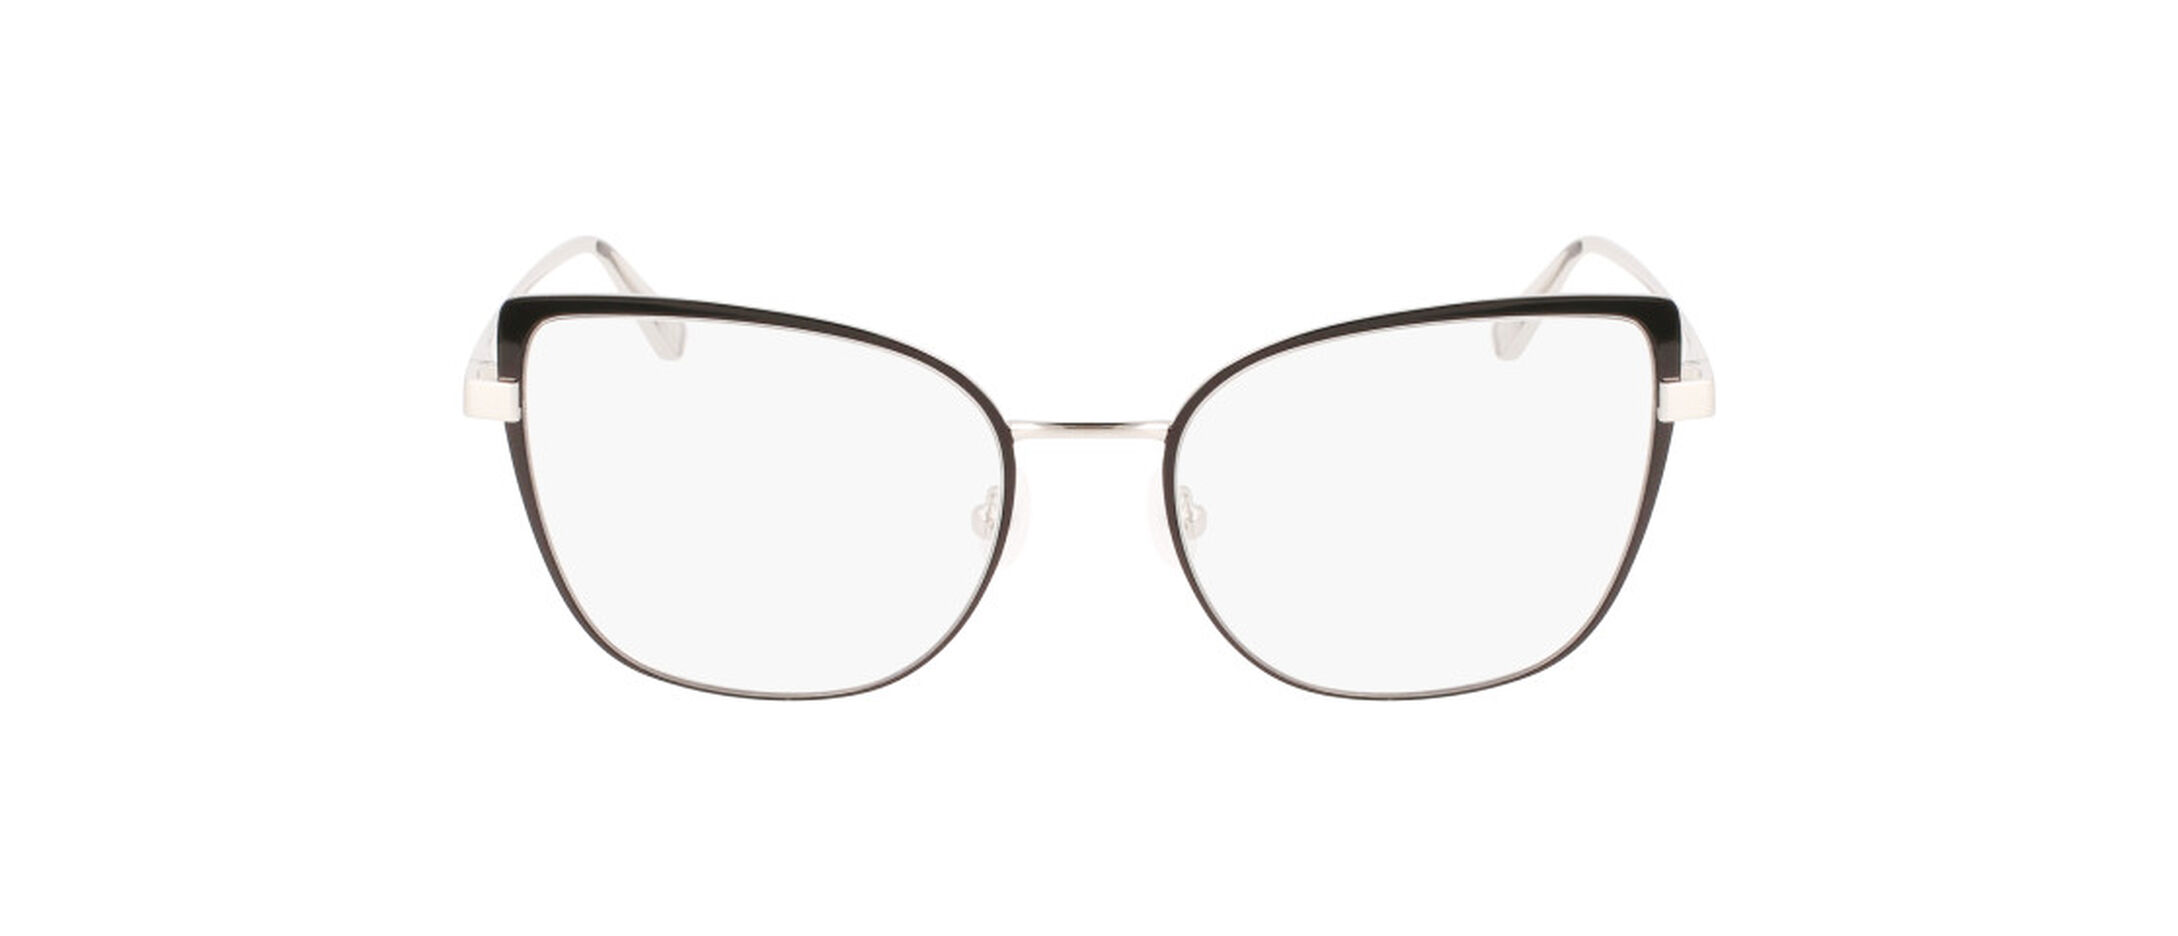 Calvin Klein CK22101 Glasses | Free Shipping and Returns | Eyeconic